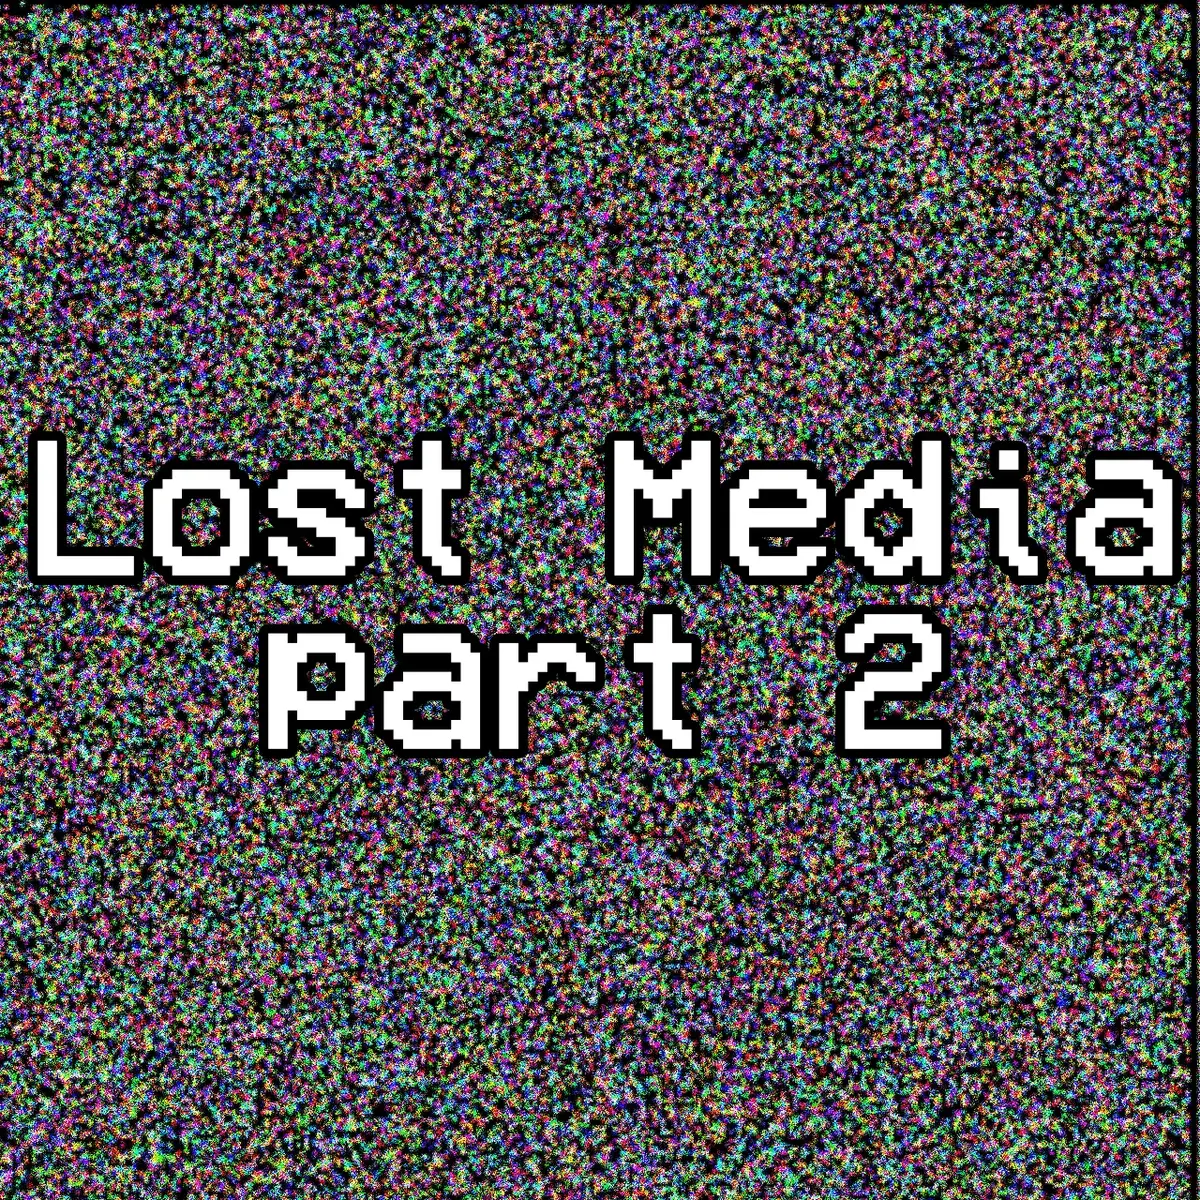 can't believe that Charlie the Steak is deadass lost media bruh 😭 (reupload since i made some mistakes) #fyp #viral #lostmedia #lost 